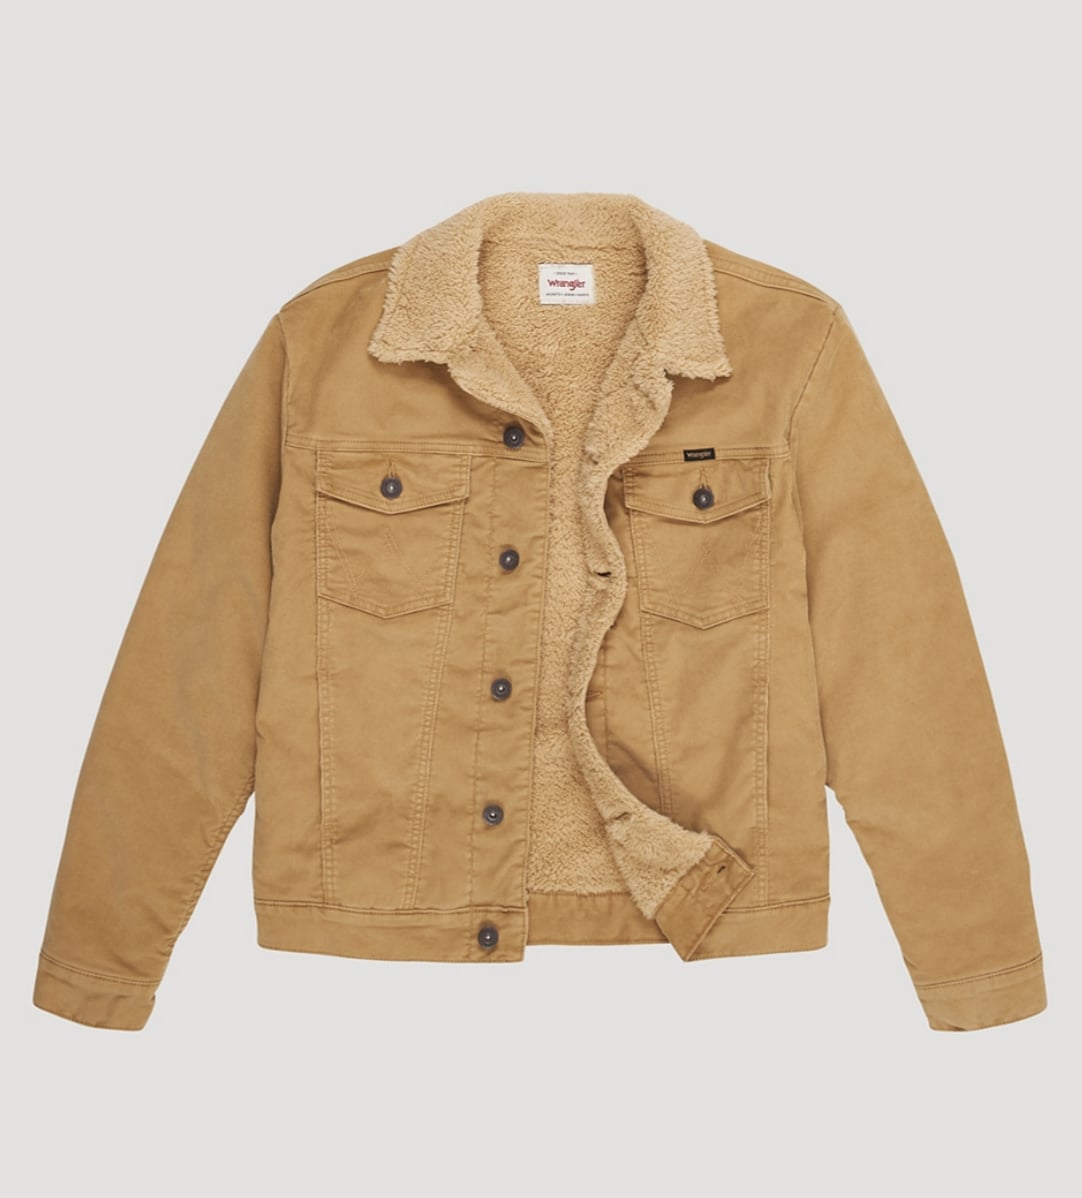 Wrangler Men's Corduroy Sherpa Lined Jacket in Bistre | The 1 Sherpa Jacket  That Says 